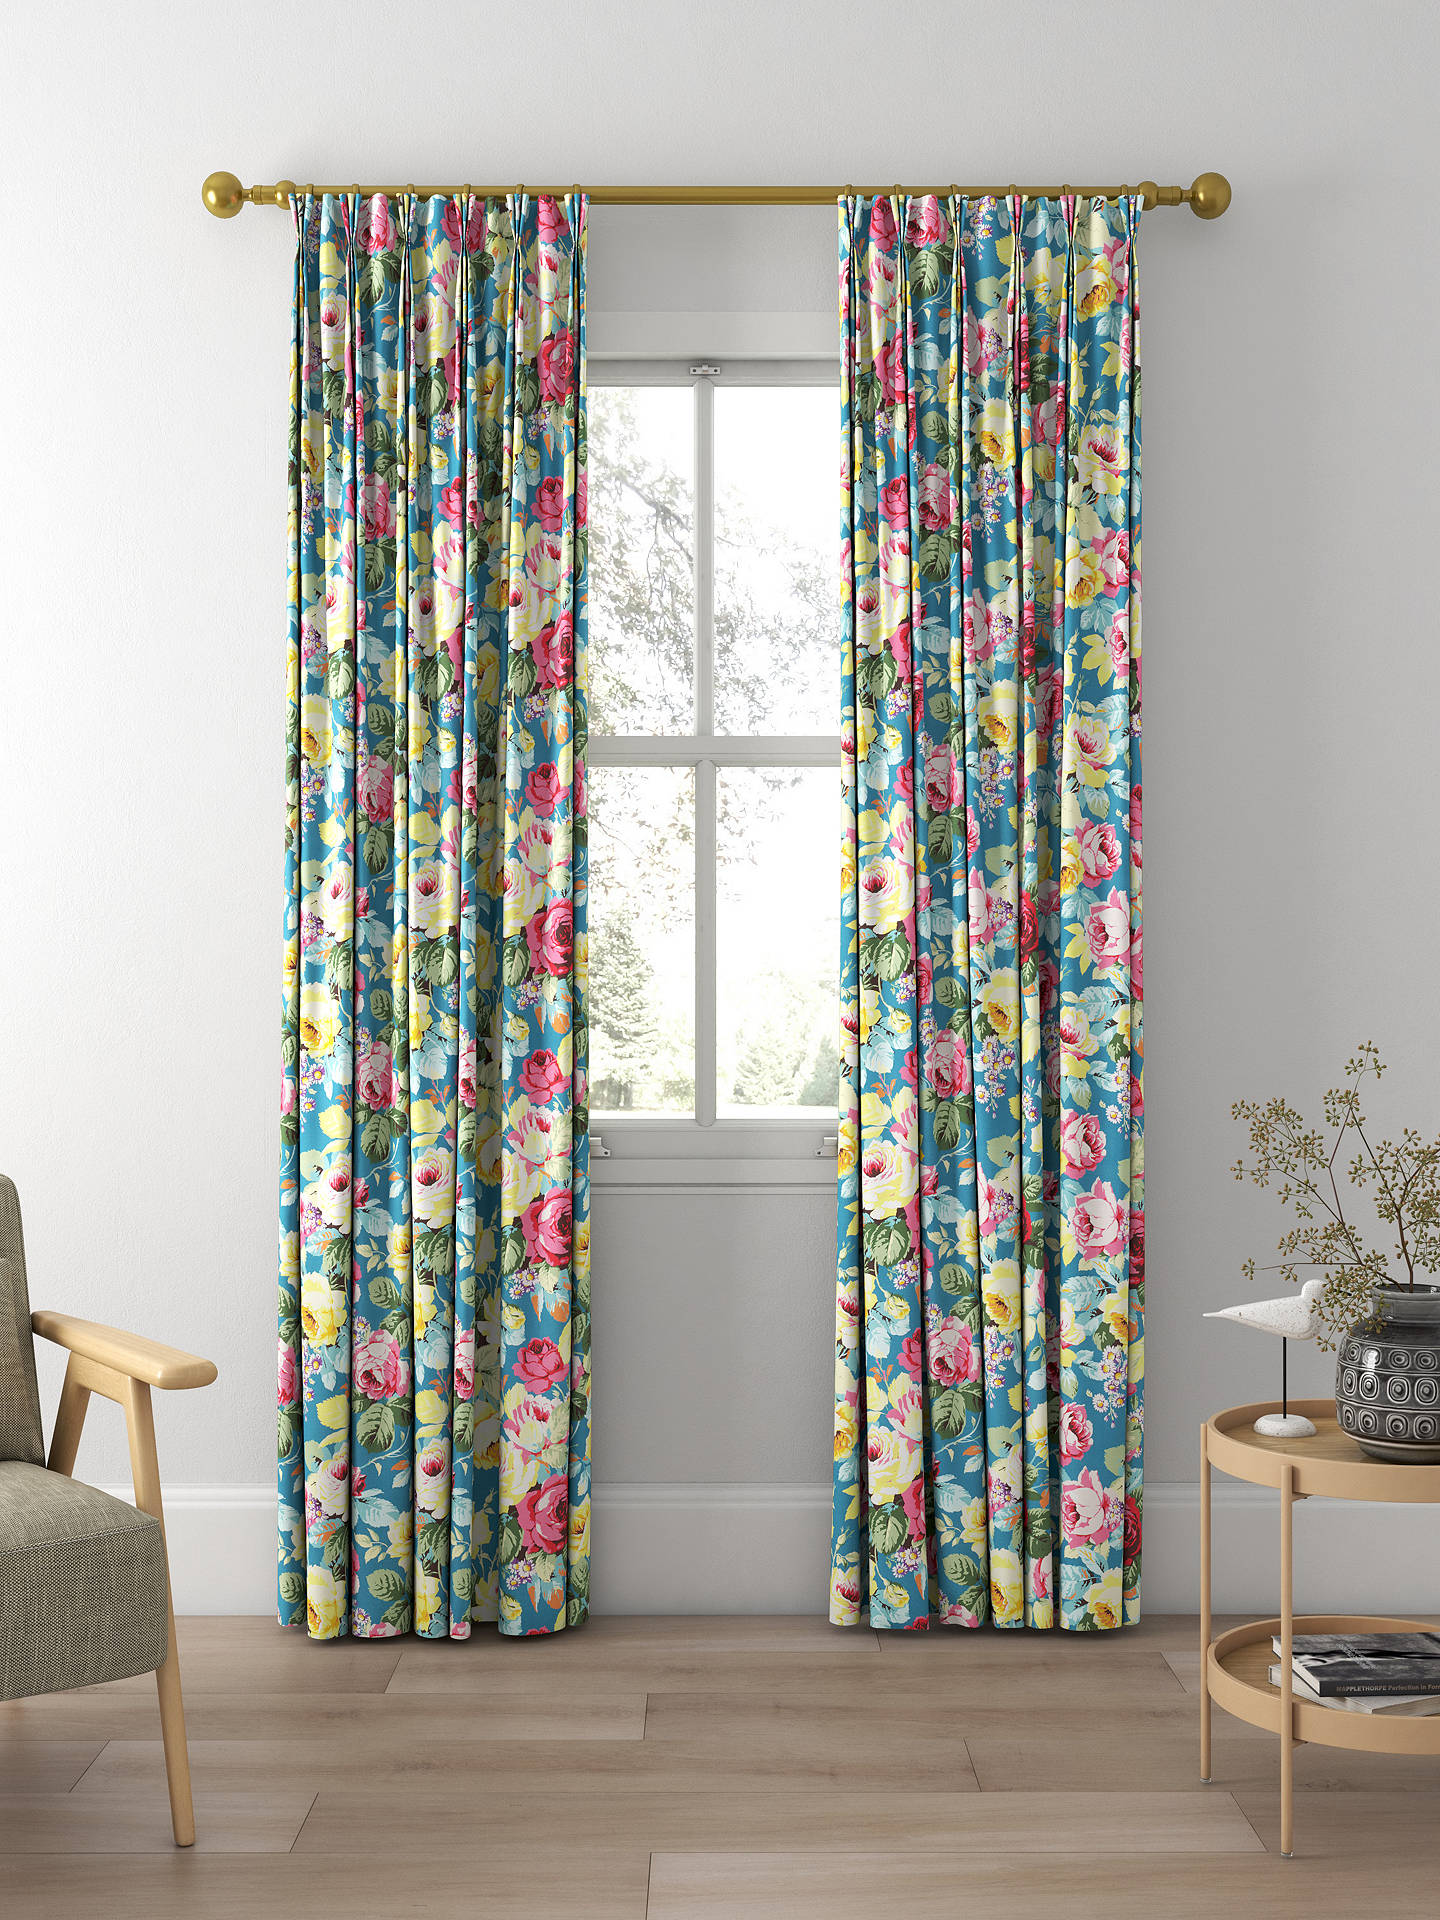 Sanderson Chelsea Made to Measure Curtains, Multi